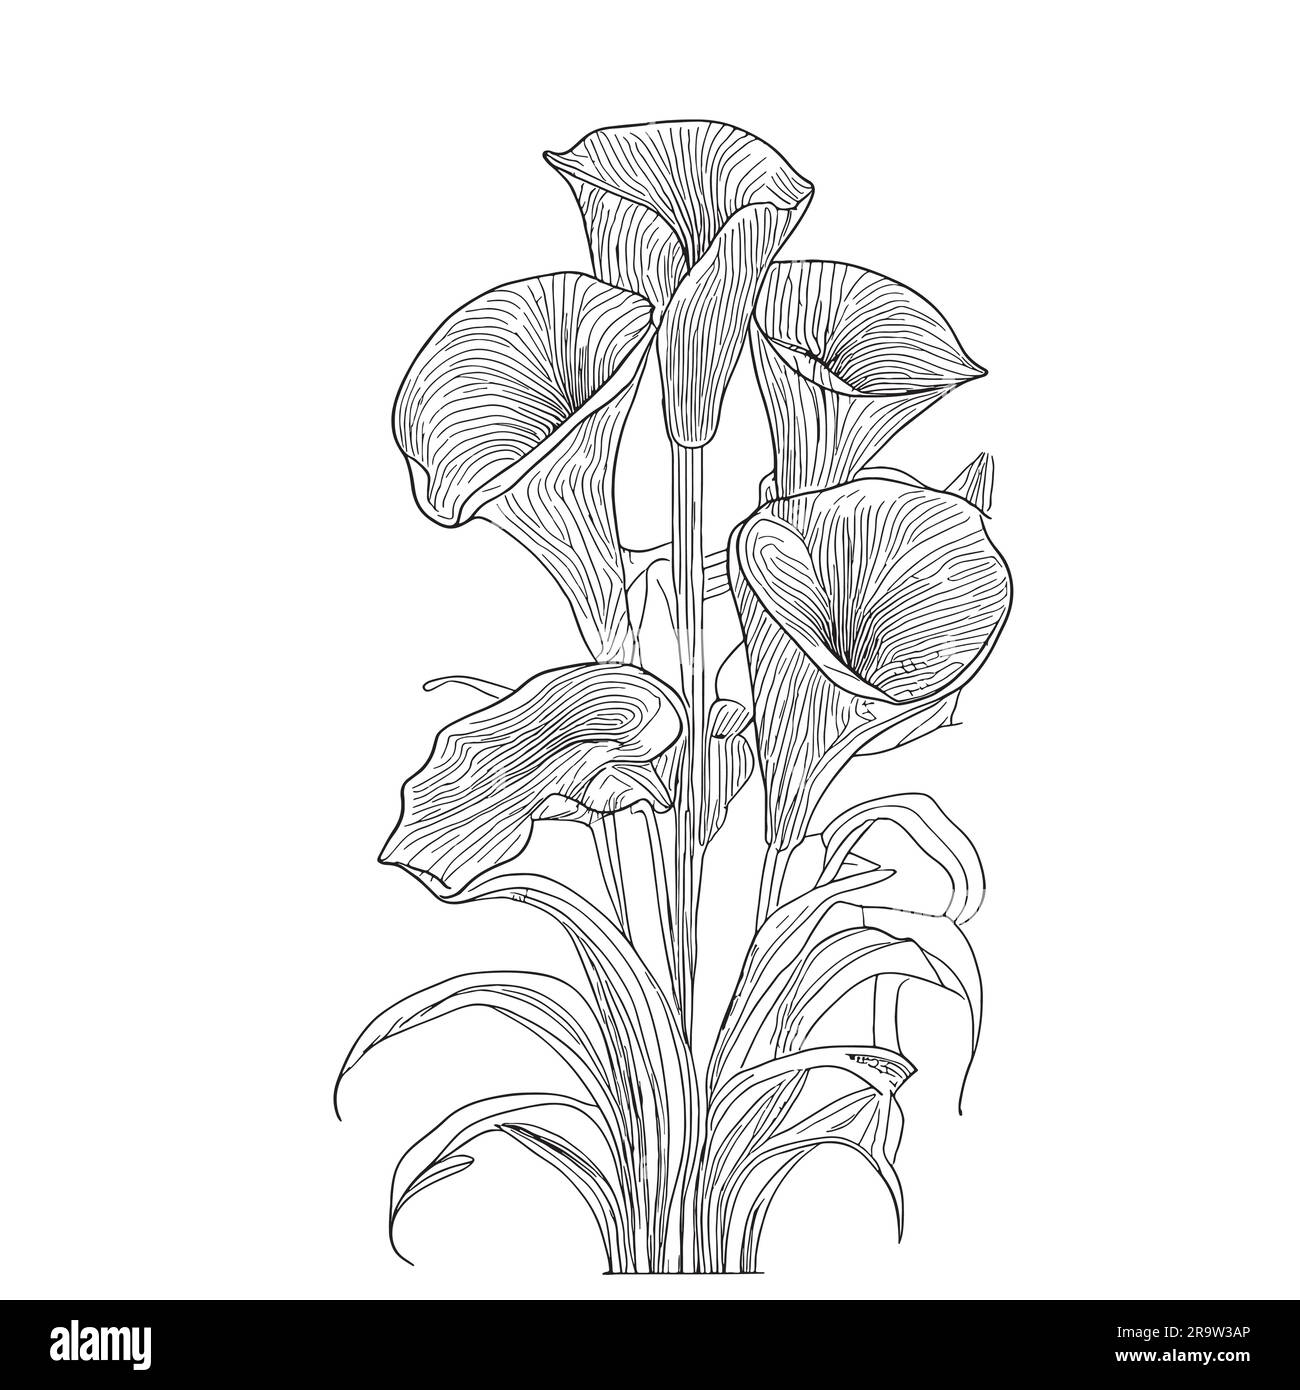 Calla lilies bouquet hand drawn sketch in doodle style illustration Stock Vector